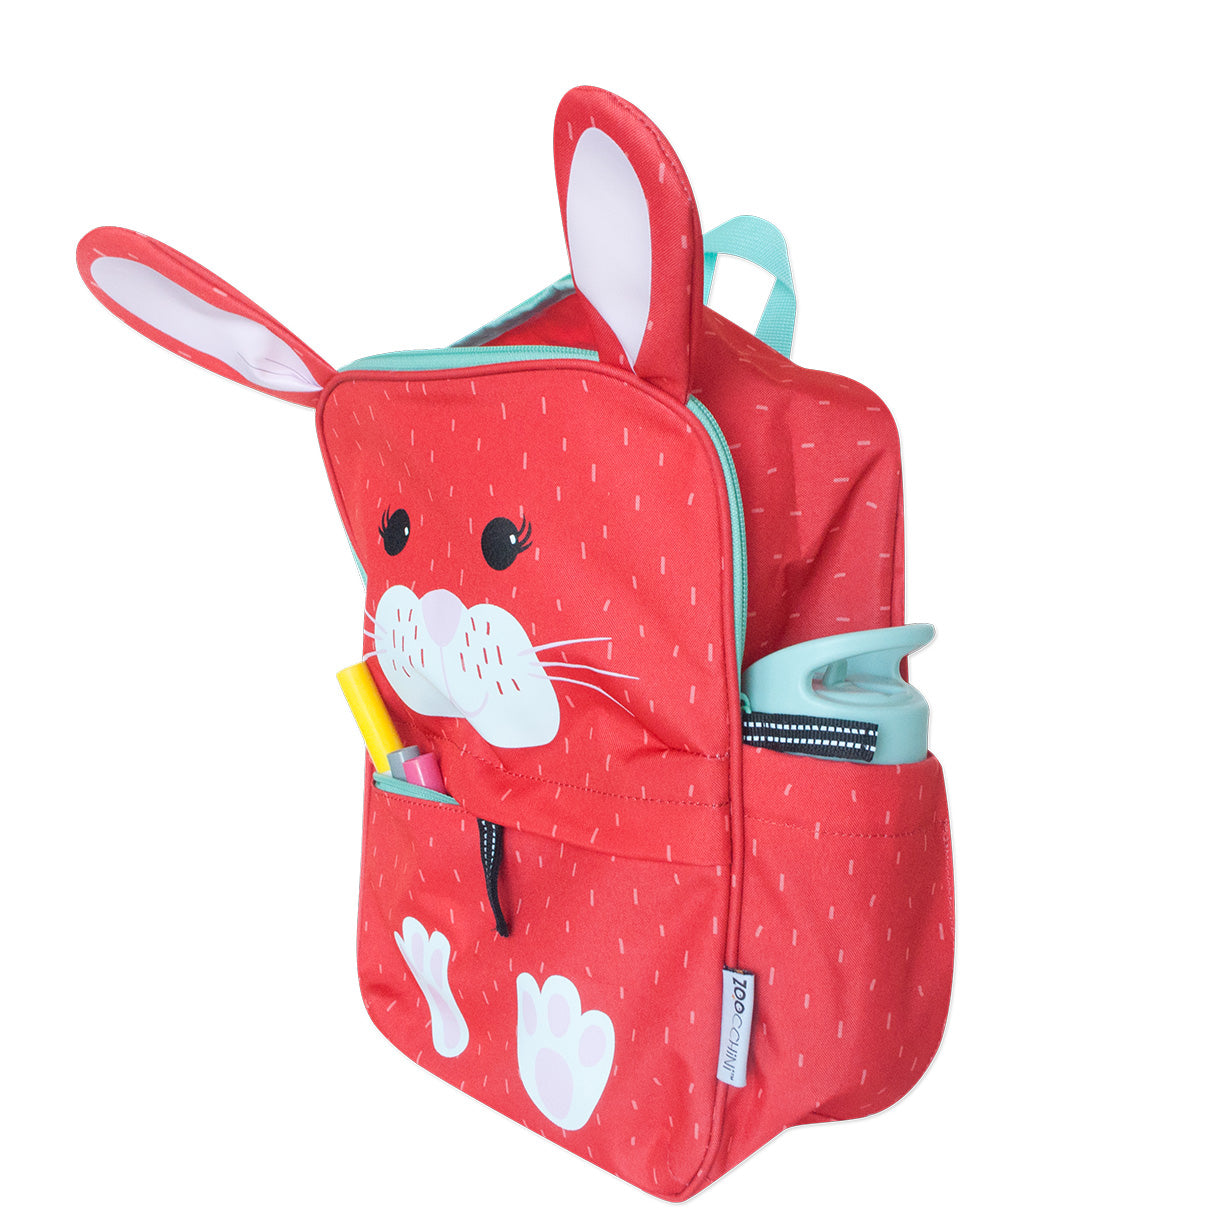 Backpack Bunny - Square ZOOCCHINI - Everyday Bella the Toddler/Kids